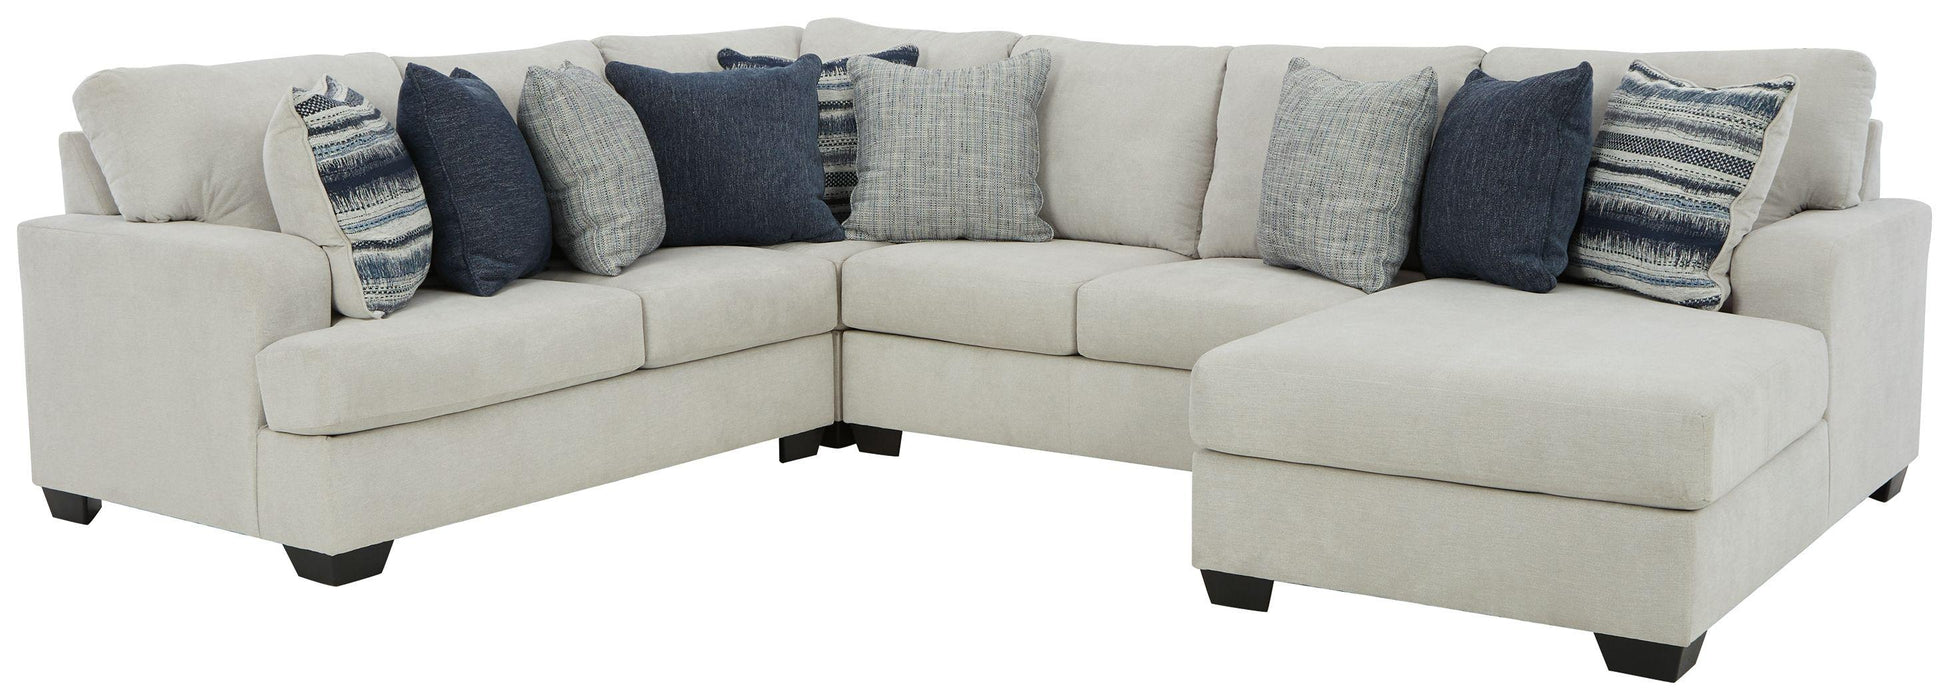 Lowder - 5 Pc. - Left Arm Facing Loveseat 4 Pc Sectional, Ottoman